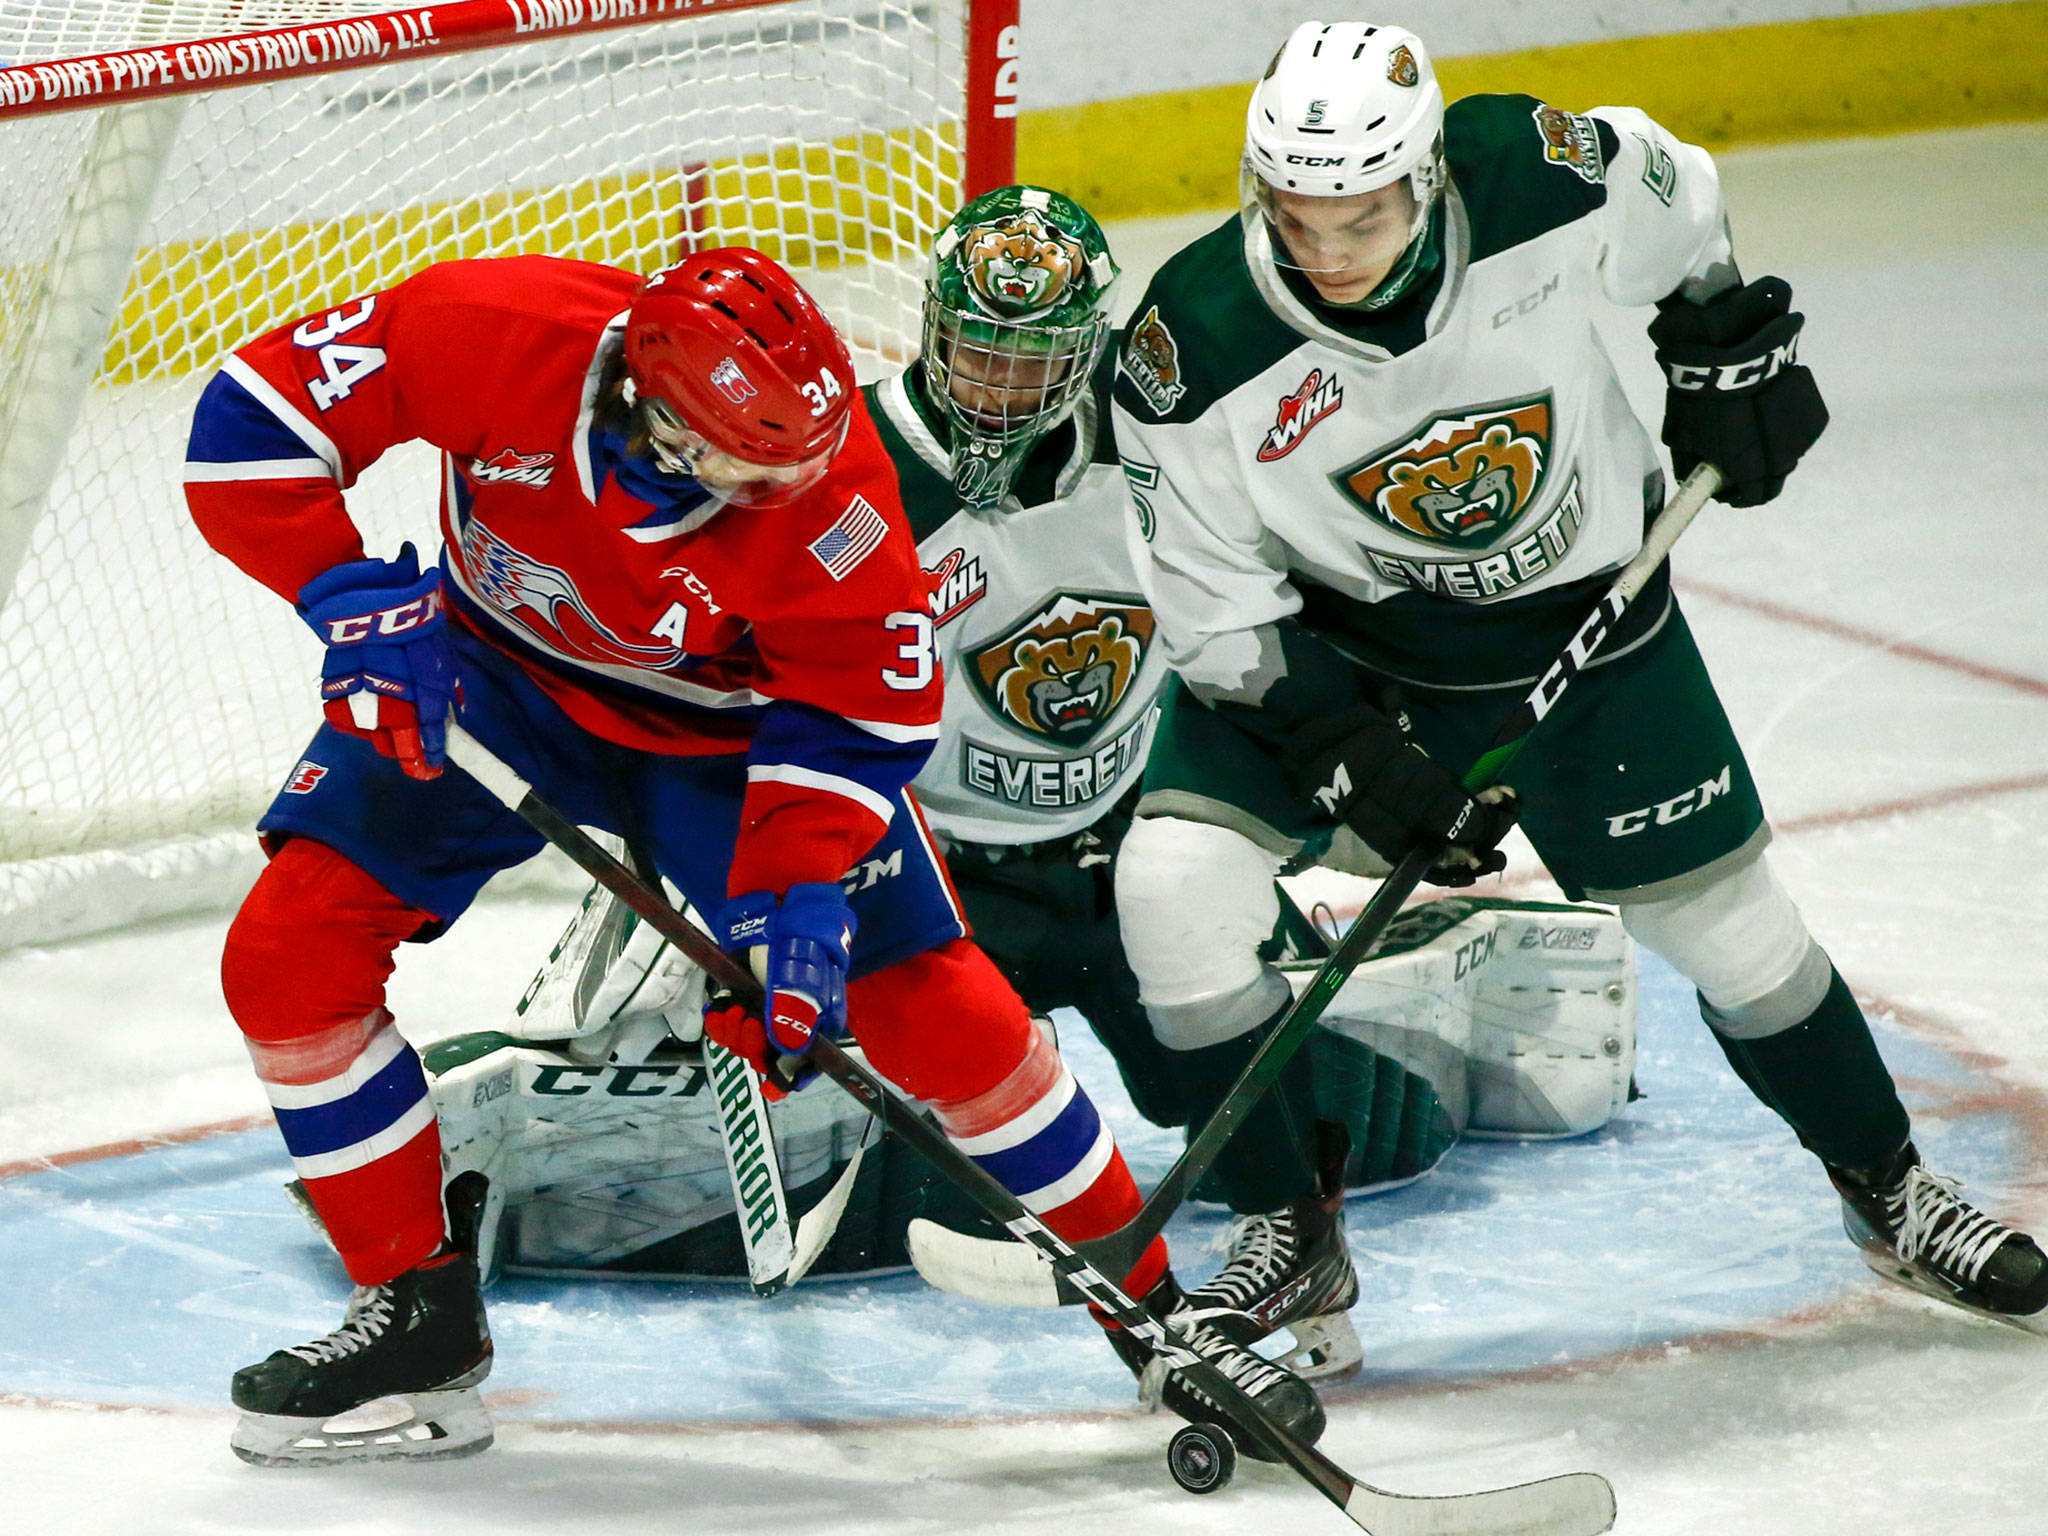 Chiefs’ Adam Beckman (left) and Silvertips’ Zach Ashton struggle for the puck in front of Silvertips’ Dustin Wolf during the final home game Friday night at Angel of the Winds Arena in Everett on May 7, 2021. (Kevin Clark / The Herald)